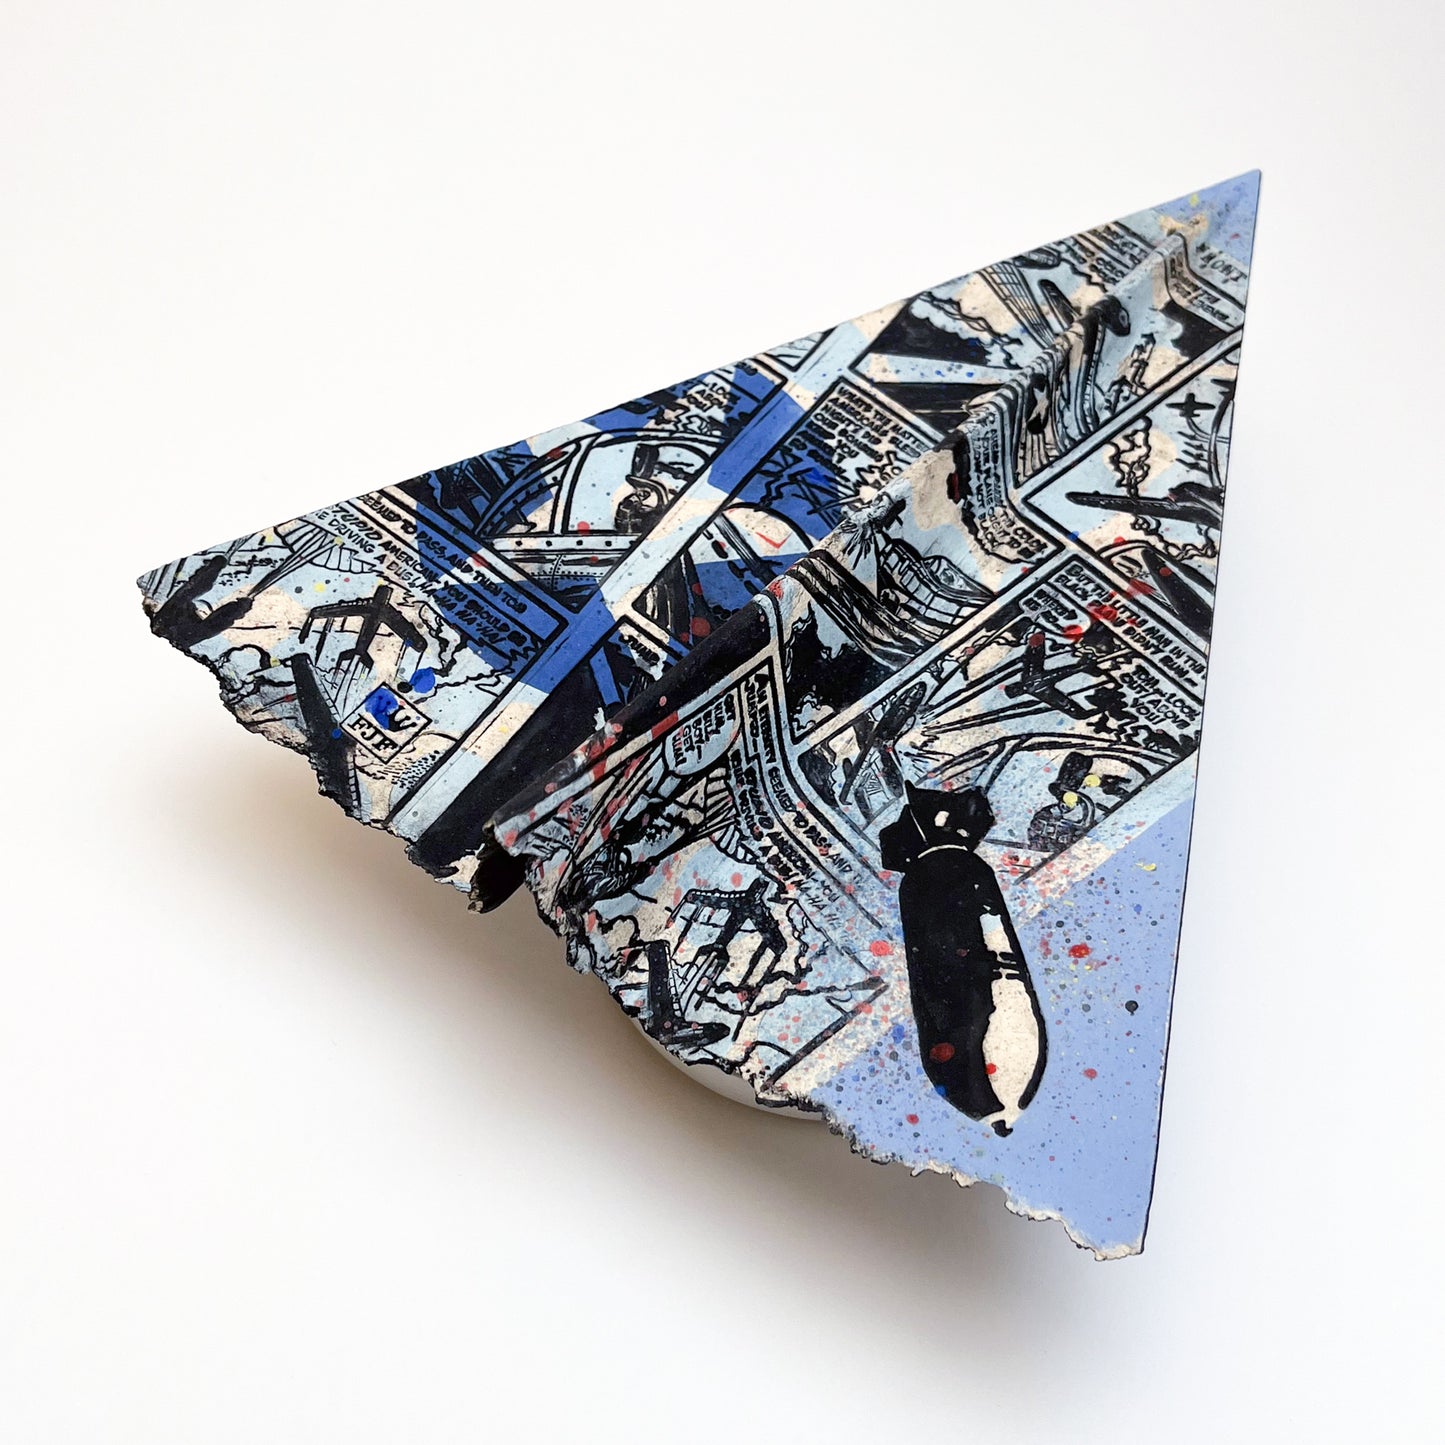 Clay "Paper" Airplane titled Bombs Away - Sculpture by Frank James Fisher.